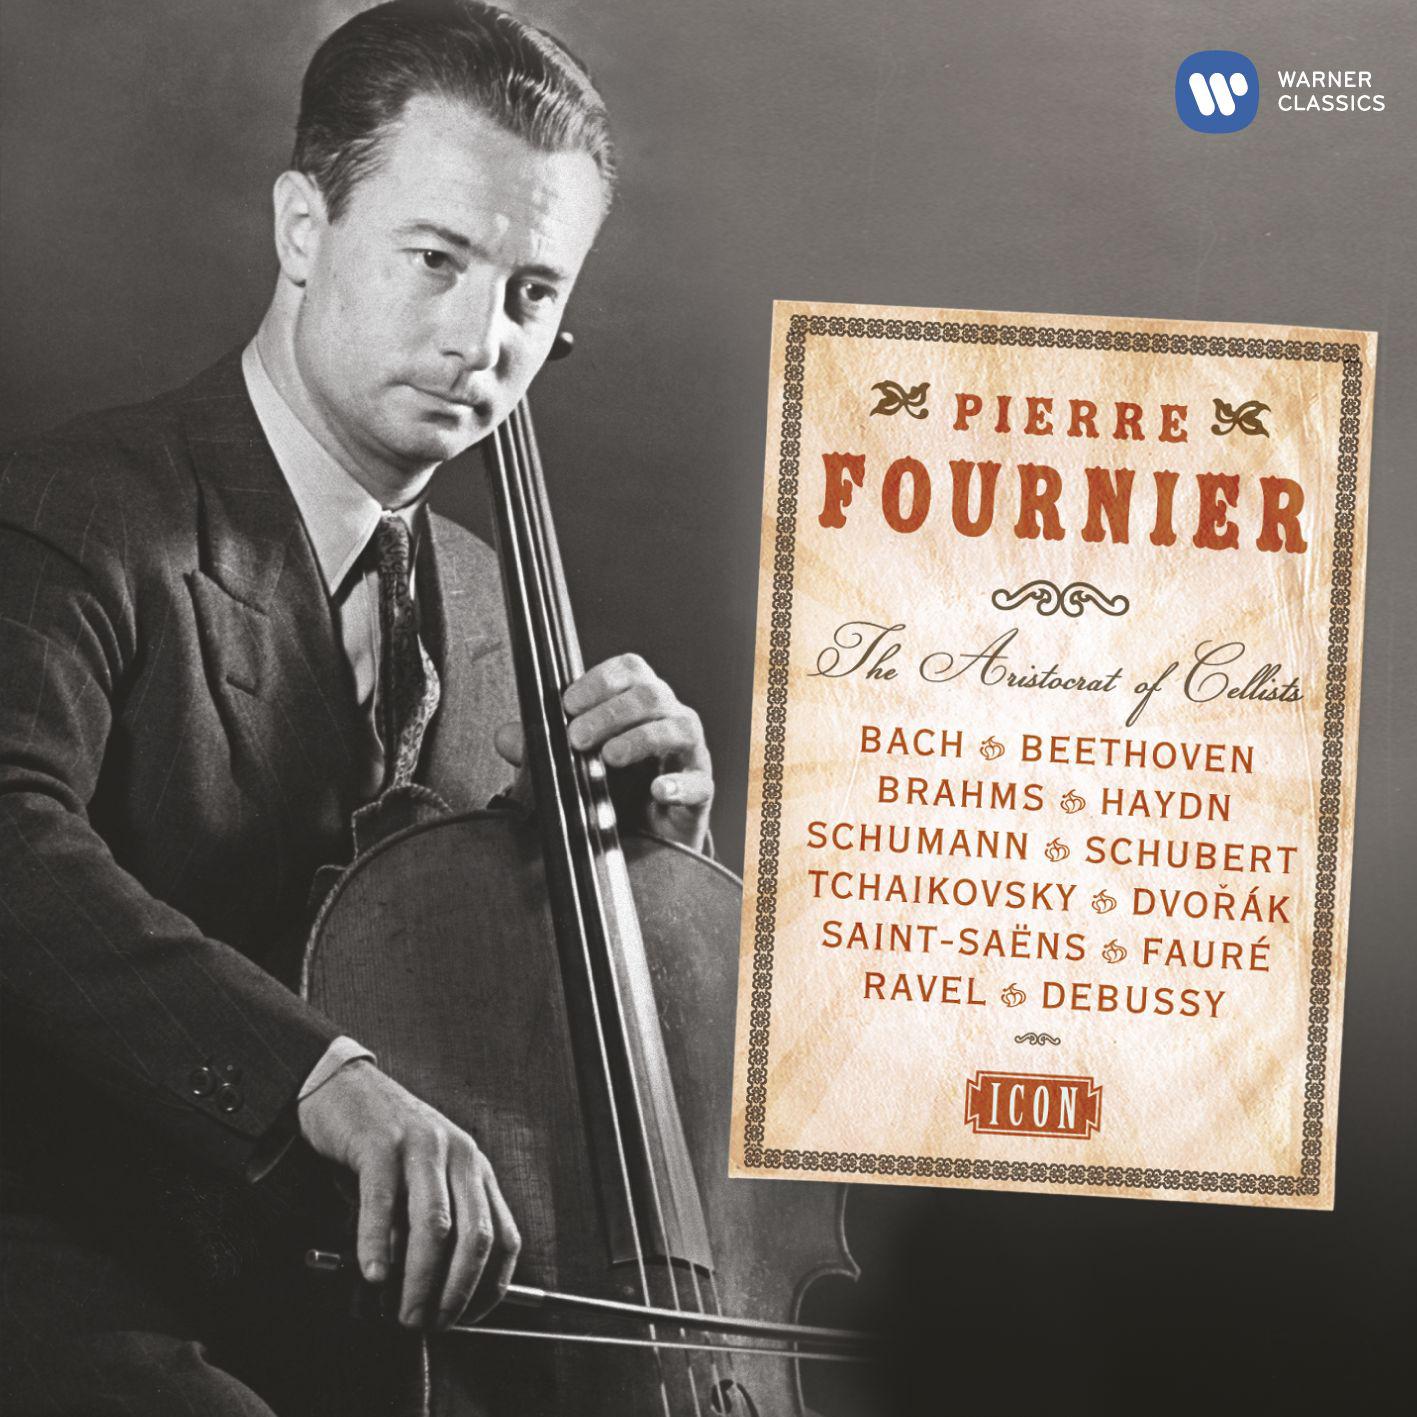 Pierre Fournier - Shylock, Op. 57:Nocturne (Arr. for Cello and Piano)